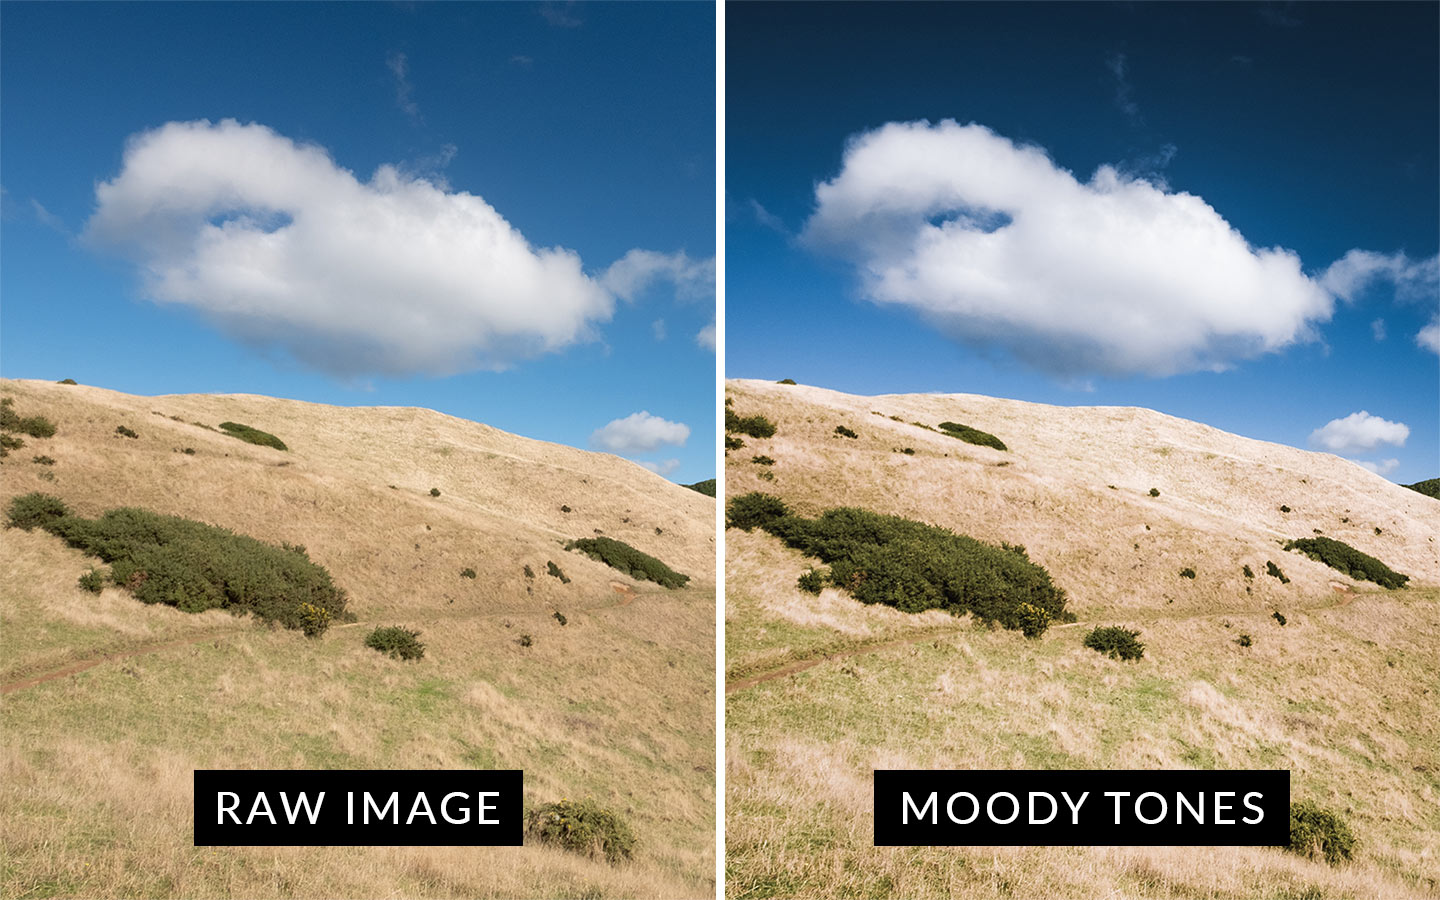 A before and after comparison showing the Moody Tones preset which is included in this moody Lightroom presets package.